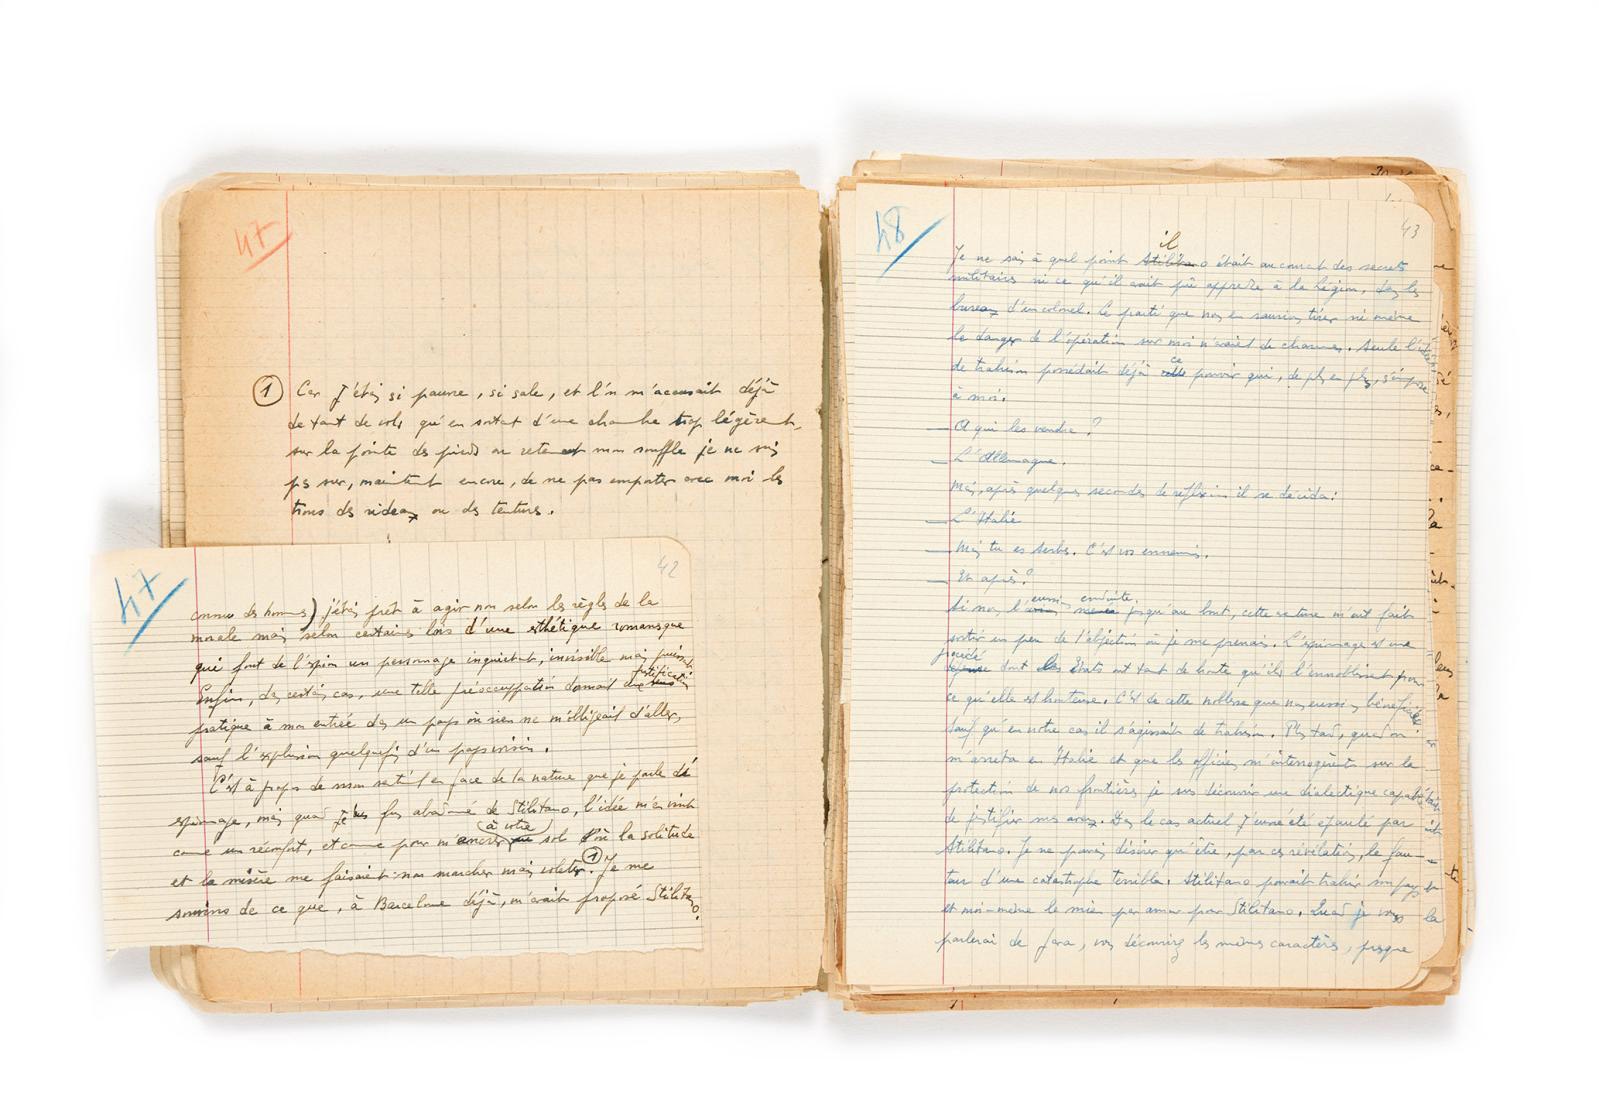 Jean Genet (1910-1986), The Thief’s Journal, signed autograph manuscript, 156 small in-quarto leaves, dated October 1947, blue or black in